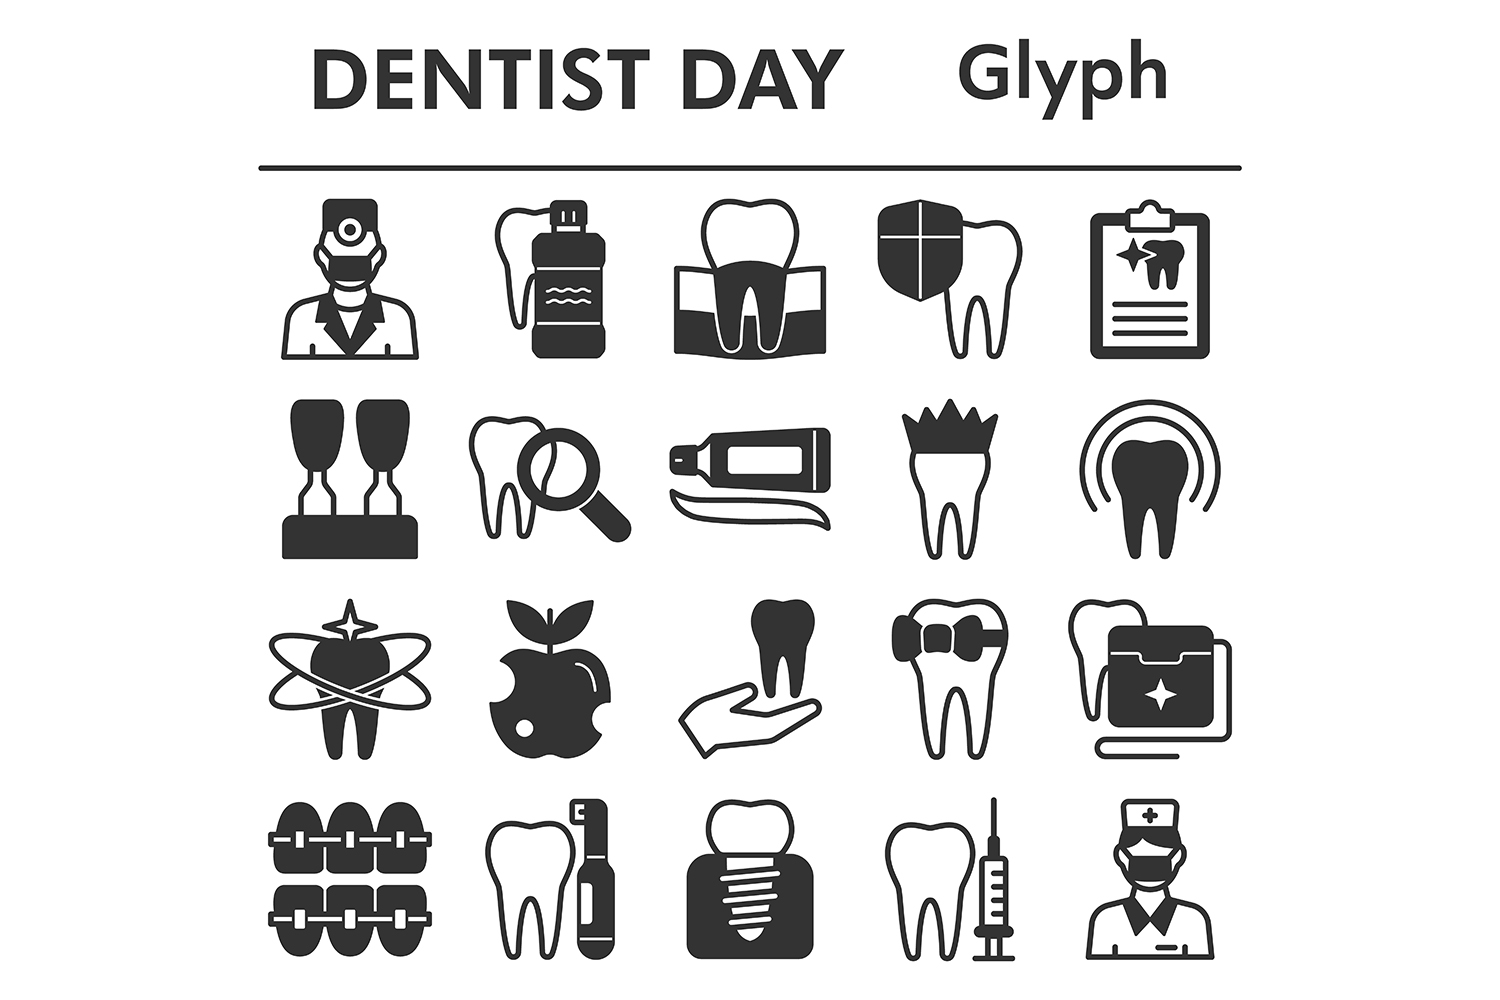 Dentist Day icons set, glyph style pinterest preview image.